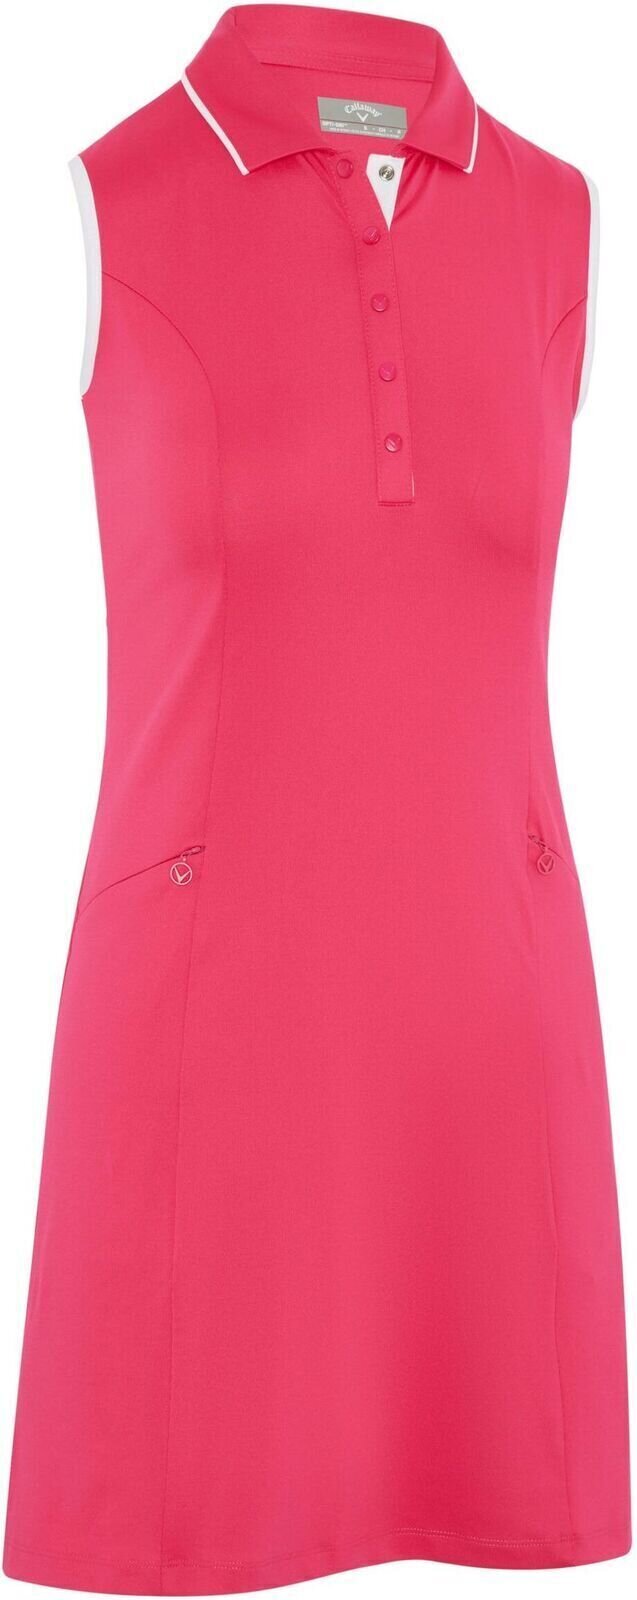 Callaway Womens Sleeveless Dress With Snap Placket Pink Peacock M